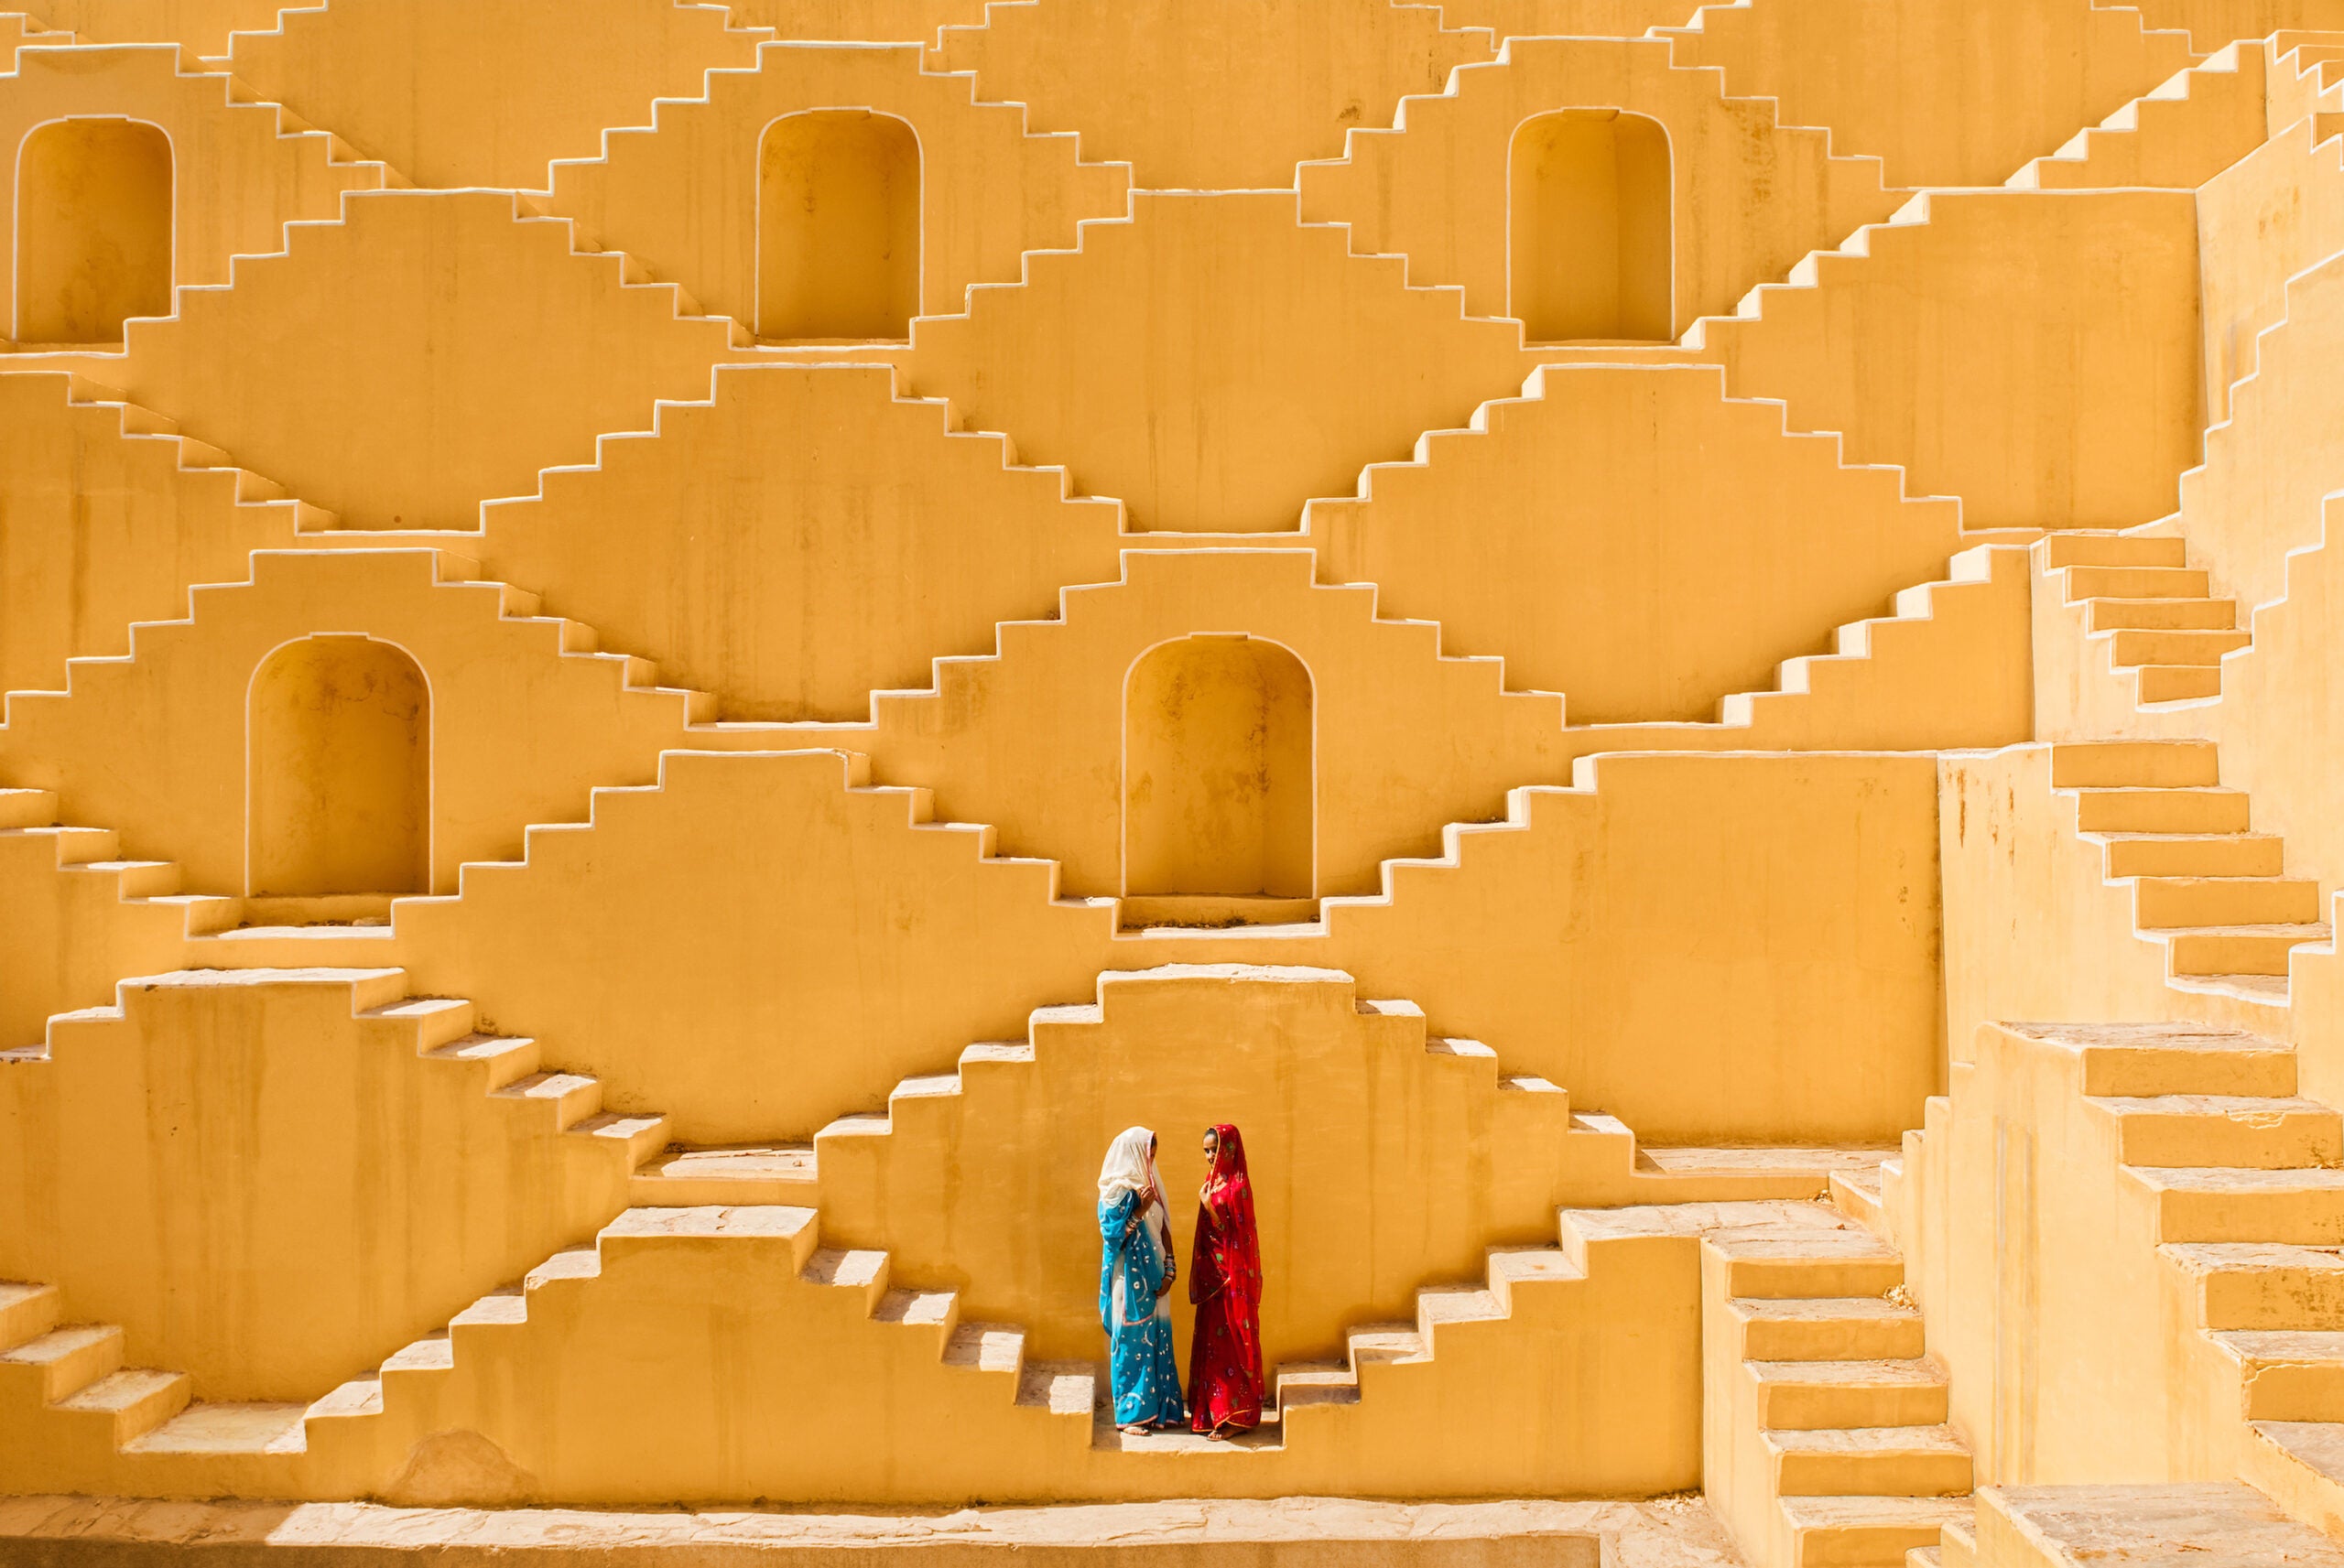 In this photo Manisha and Jasmin Singh pause in the Baoli, an ancient step well in a village near the city of Jaipur outside of India’s Thar desert.